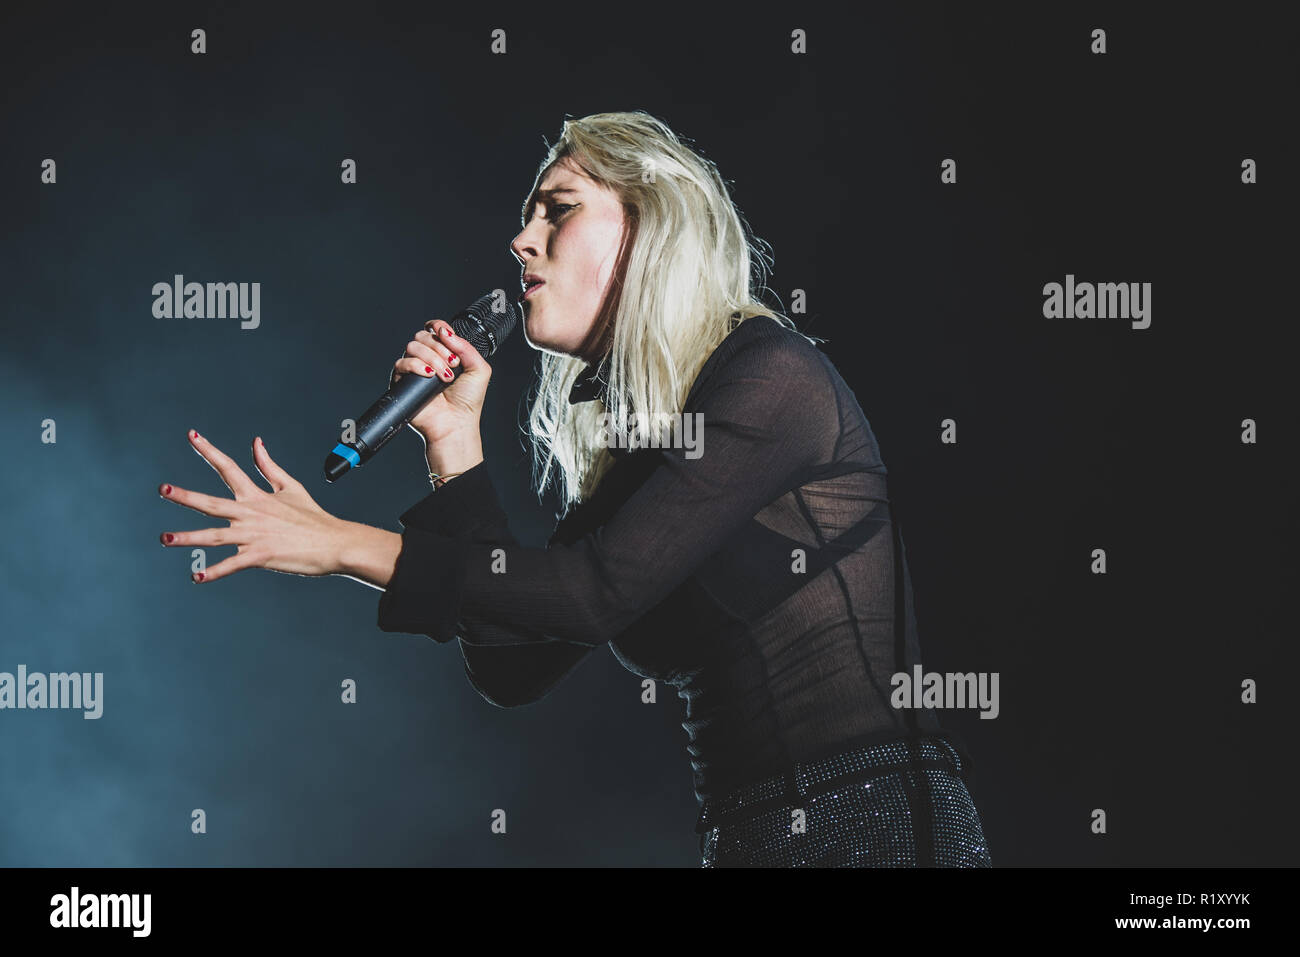 Milano, Italy. 13th Nov, 2018. Theresa Jarvis, singer of Yonaka, performing  live on stage in Milan, opening for the Bring Me The Horizon "First Love"  tour single Italian concert. Credit: Alessandro Bosio/Pacific